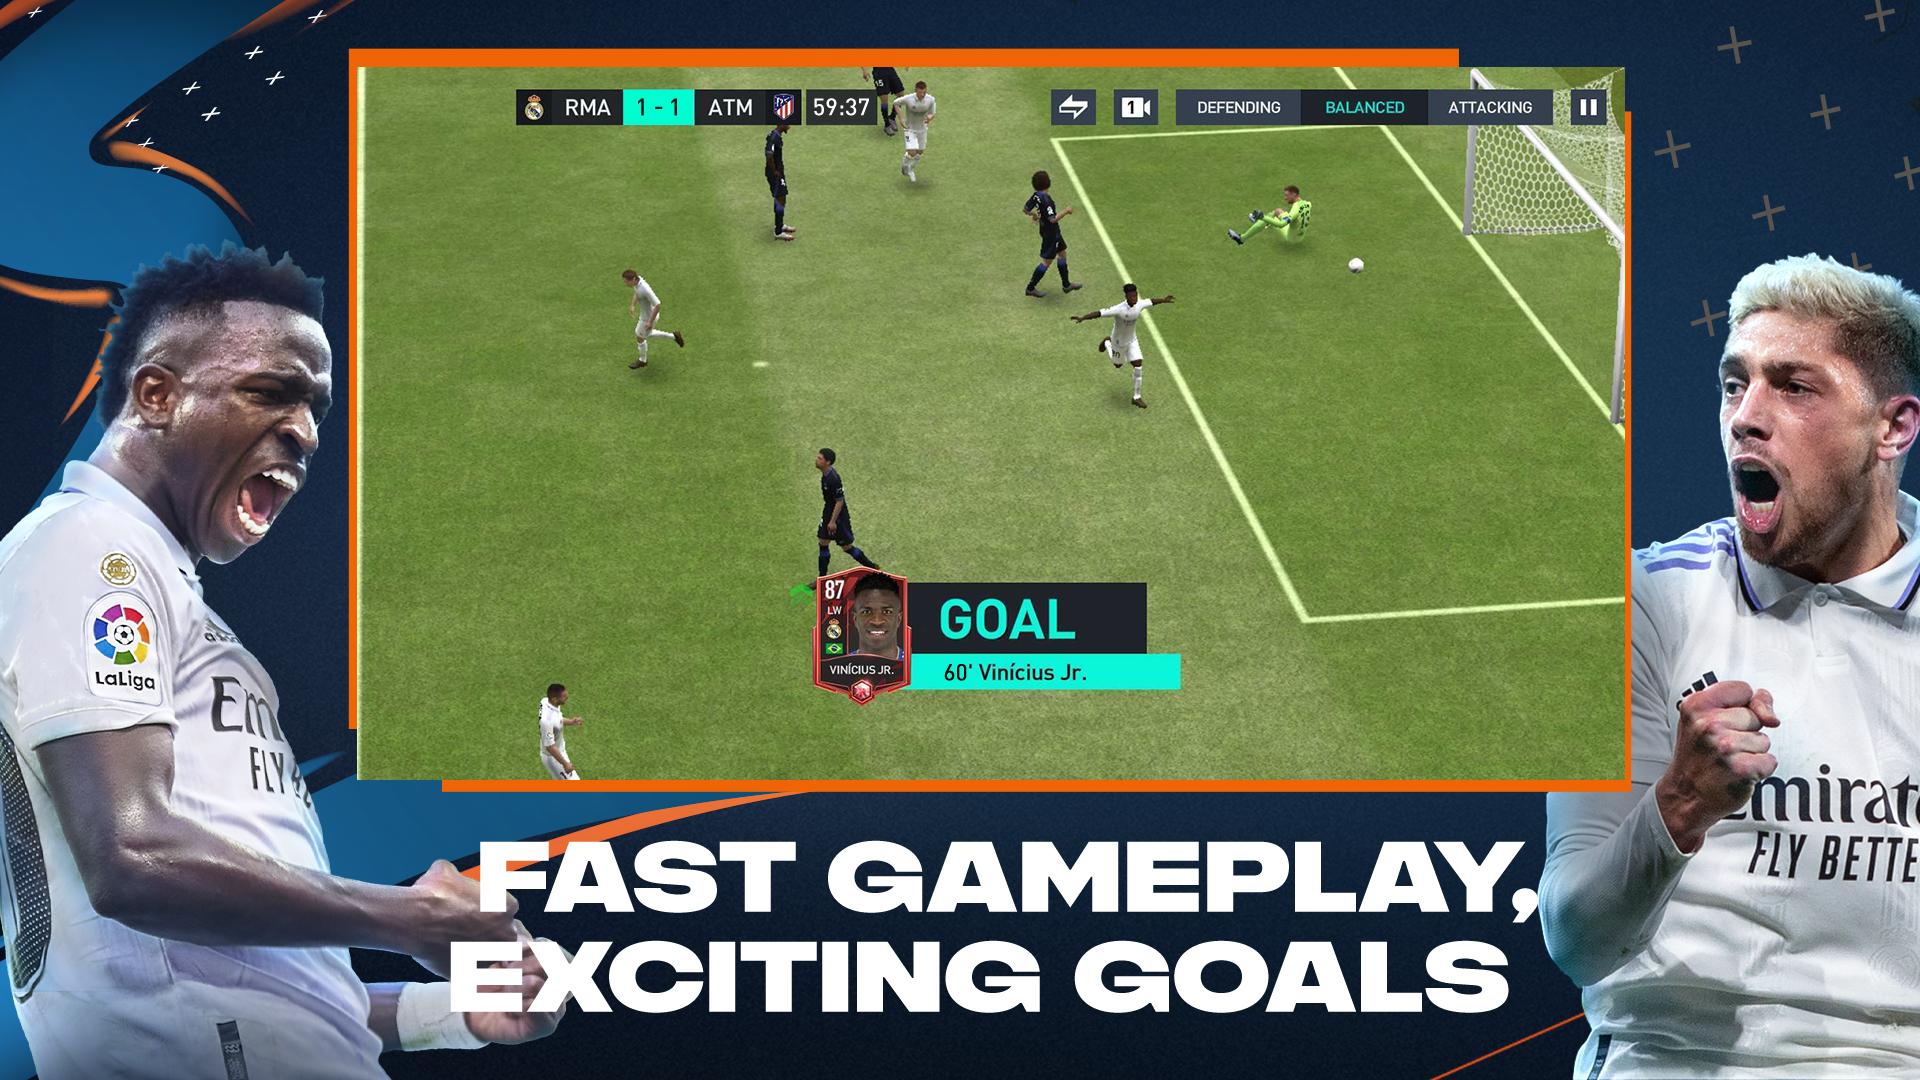 Download FIFA Mobile: FIFA World Cup™ on PC With GameLoop Emulator